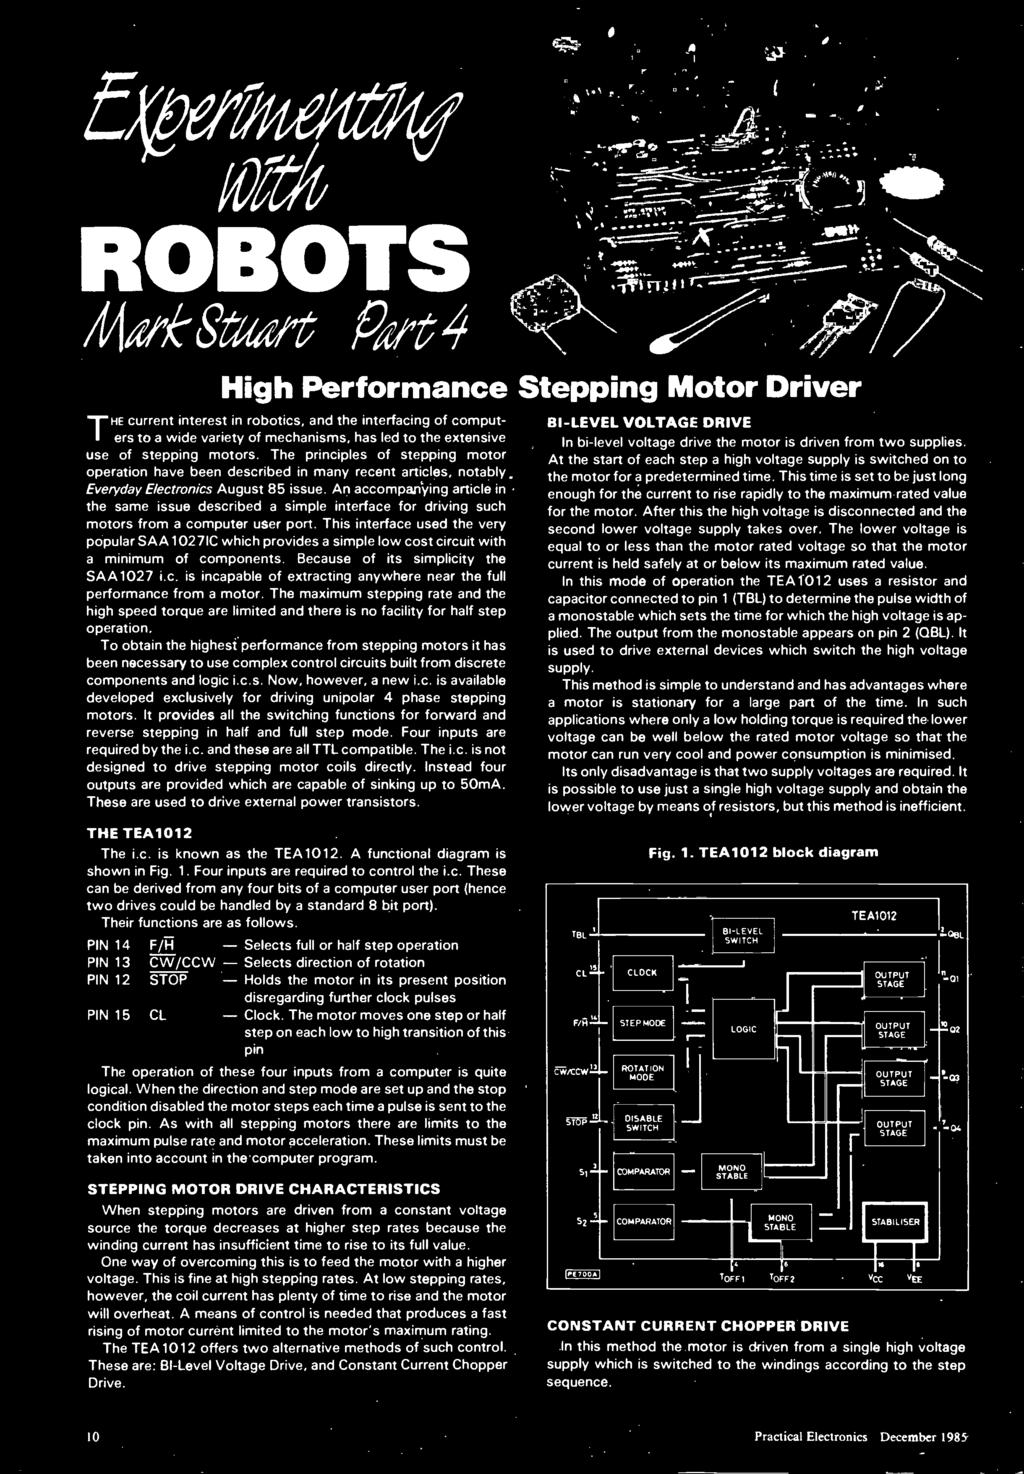 An accompanying article in the same issue described a simple interface for driving such motors from a computer user port.